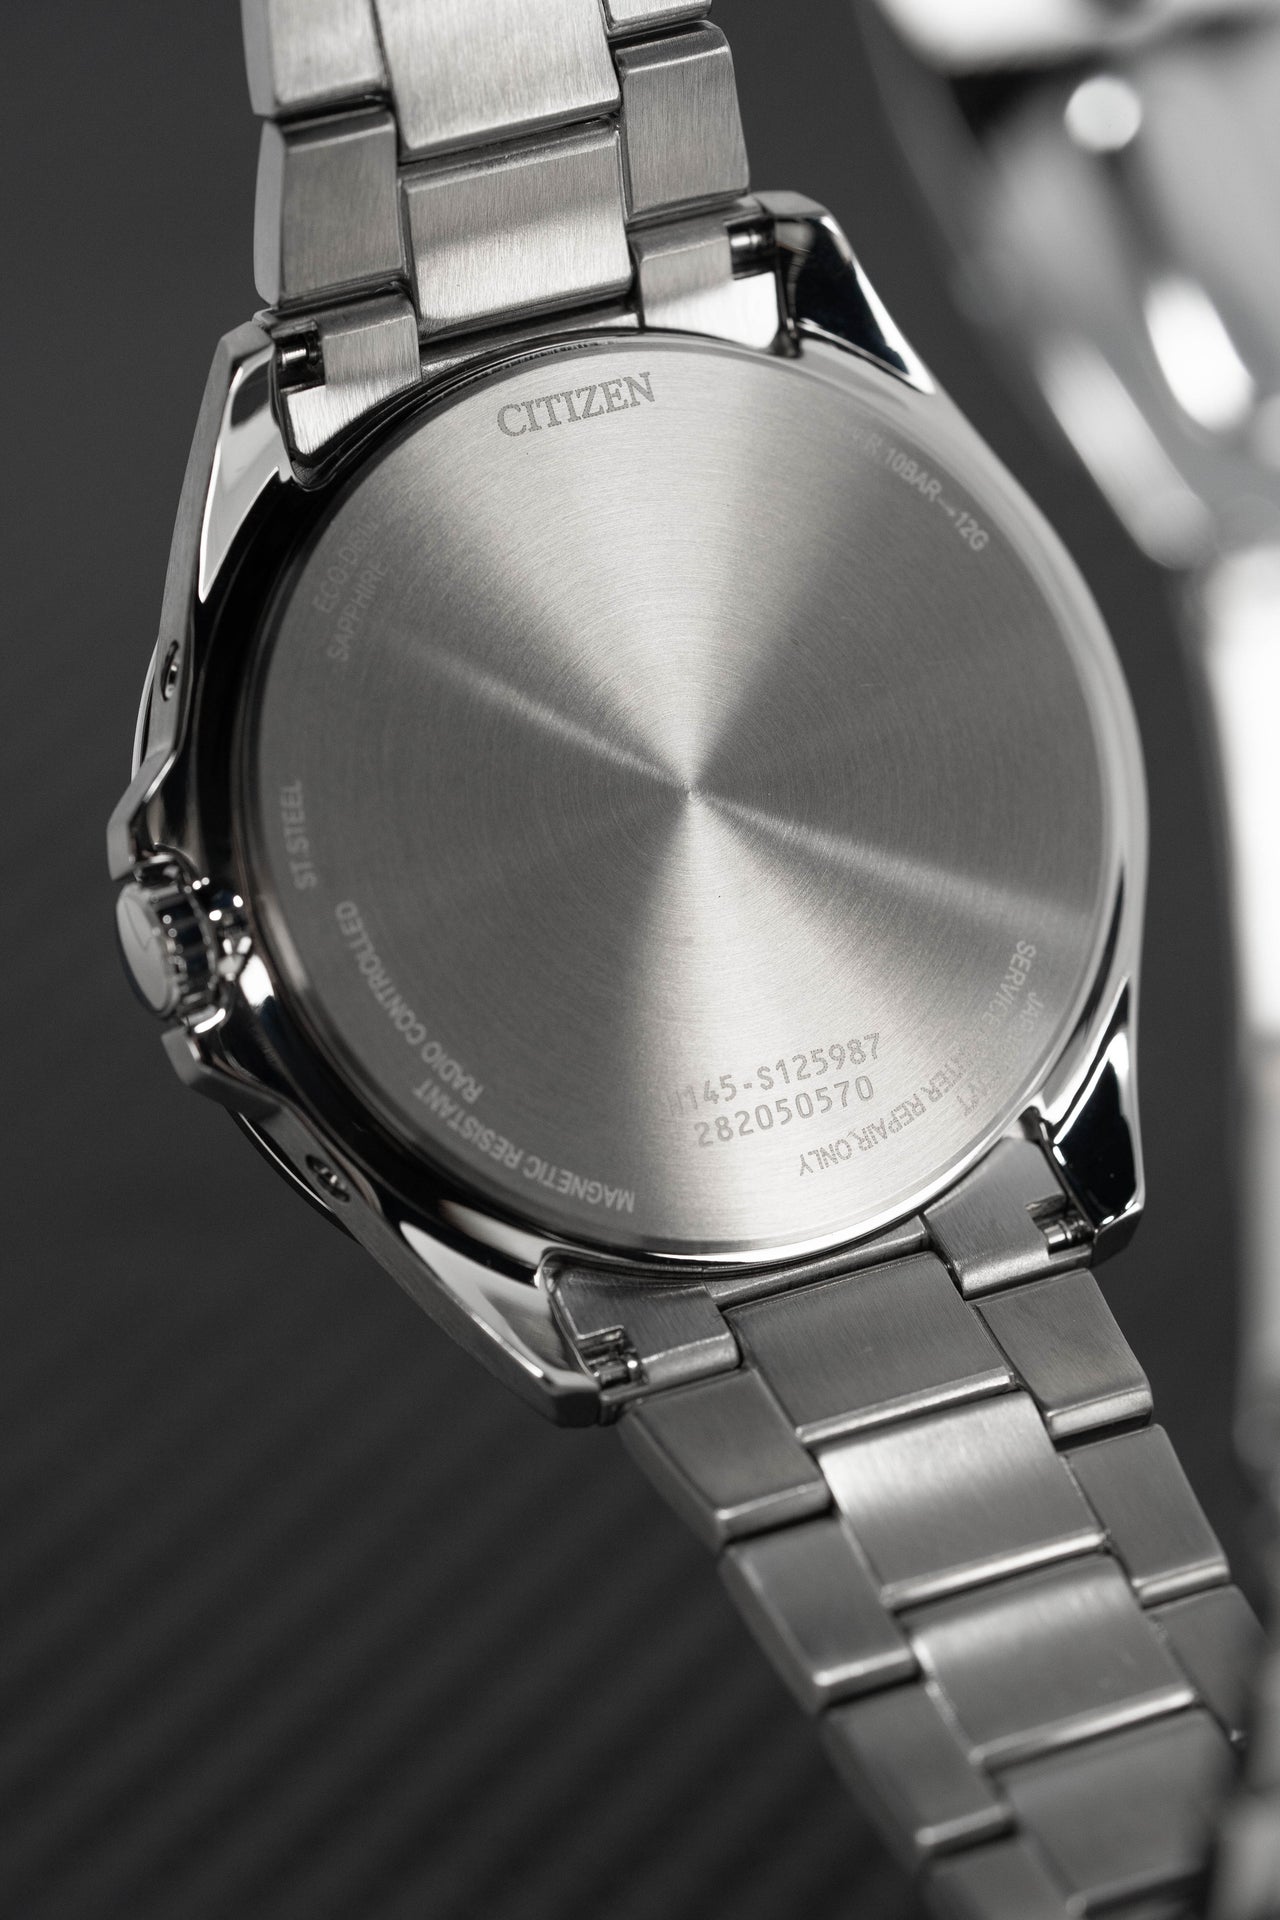 citizen eco drive crystal replacement cost - OFF-51% >Free Delivery